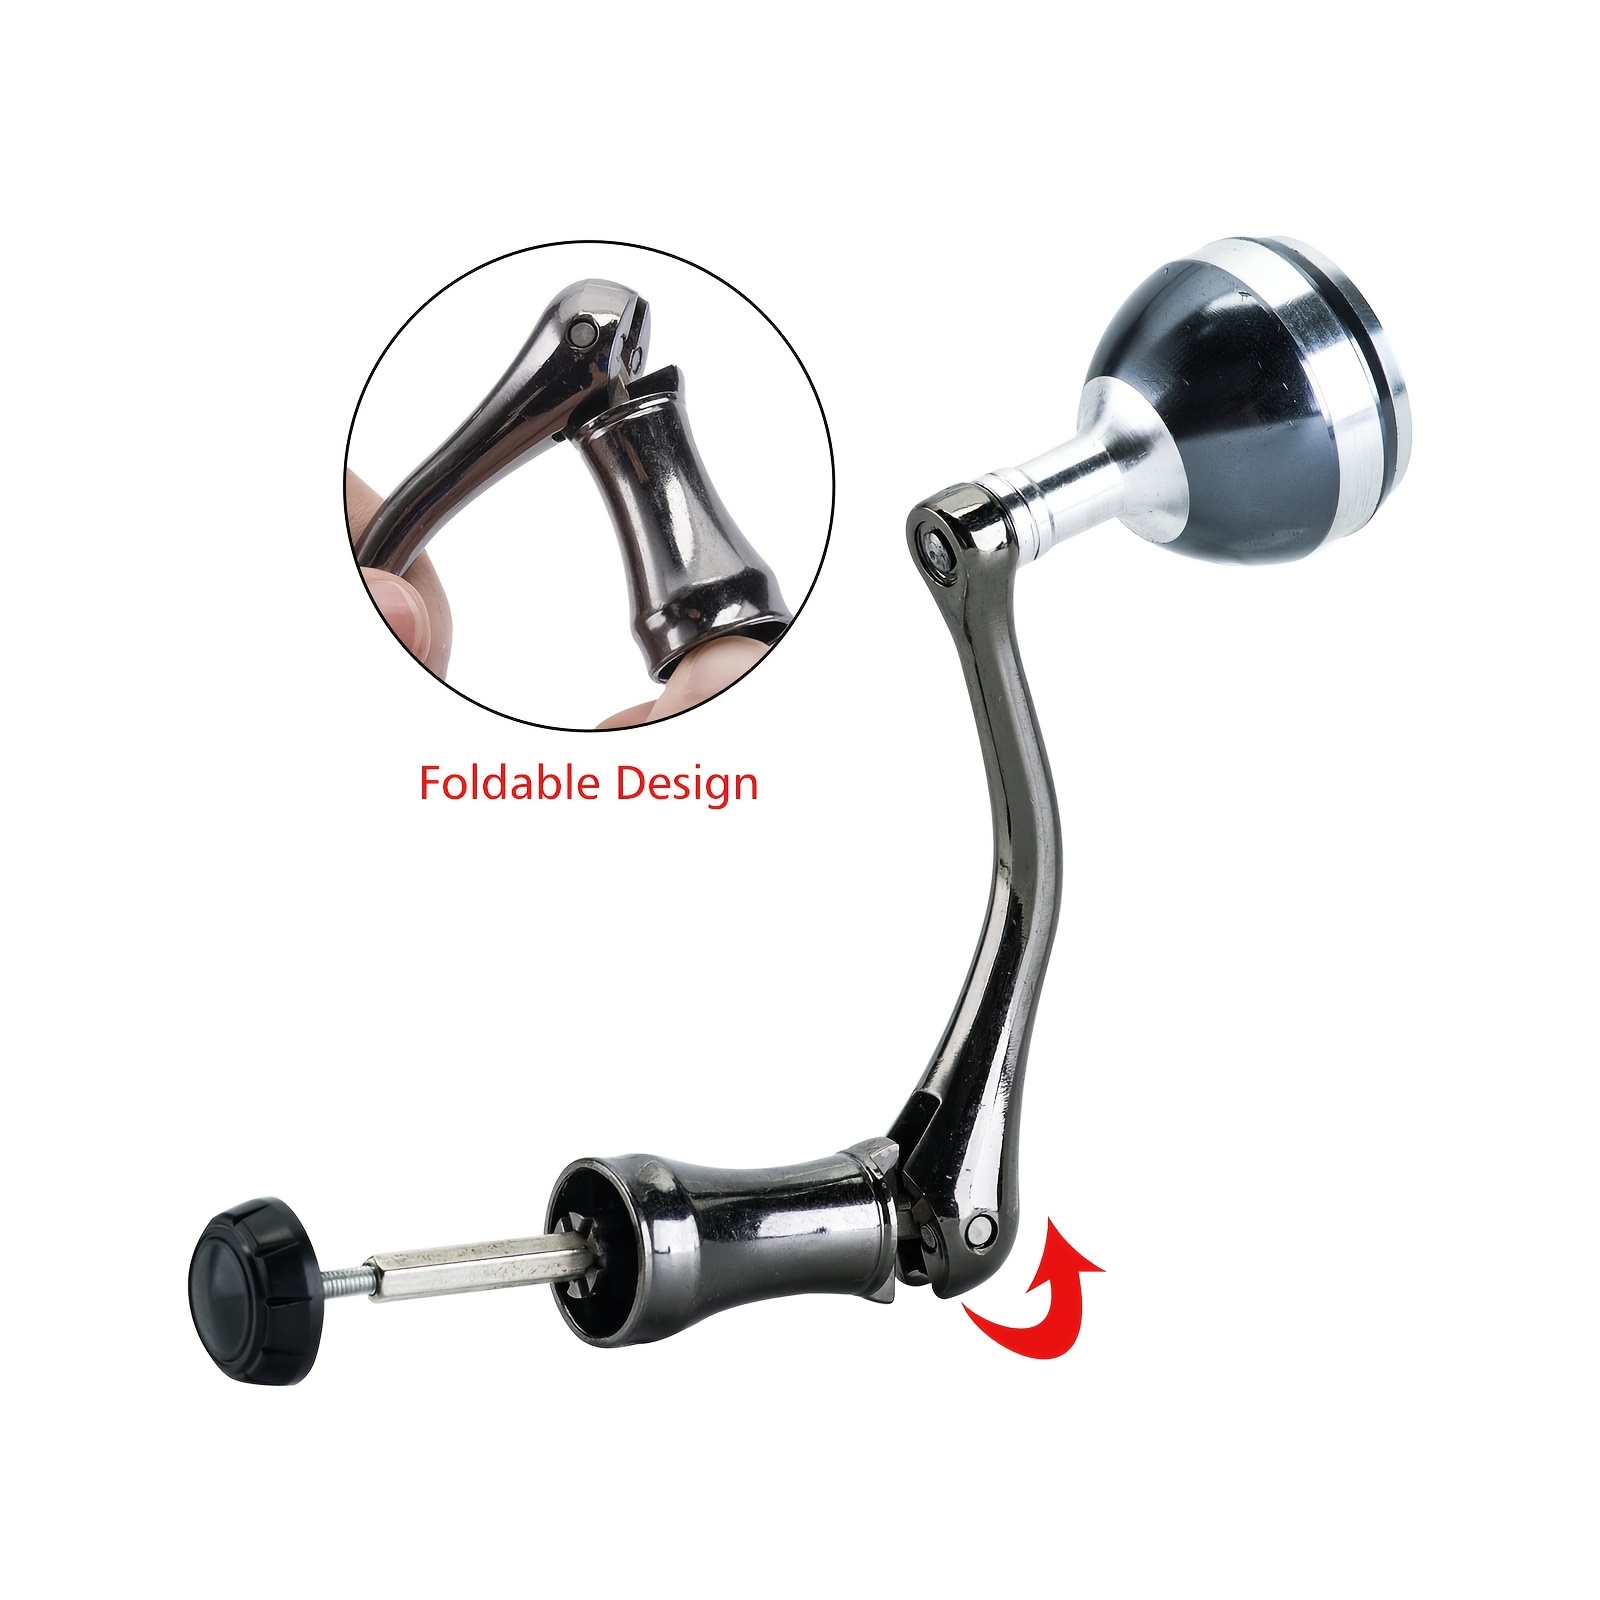 * Spinning Reel Handle - Metal Replacement Handle with Round Power Knob -  Available in 3 Sizes (S/M/L) - Improved Grip and Control